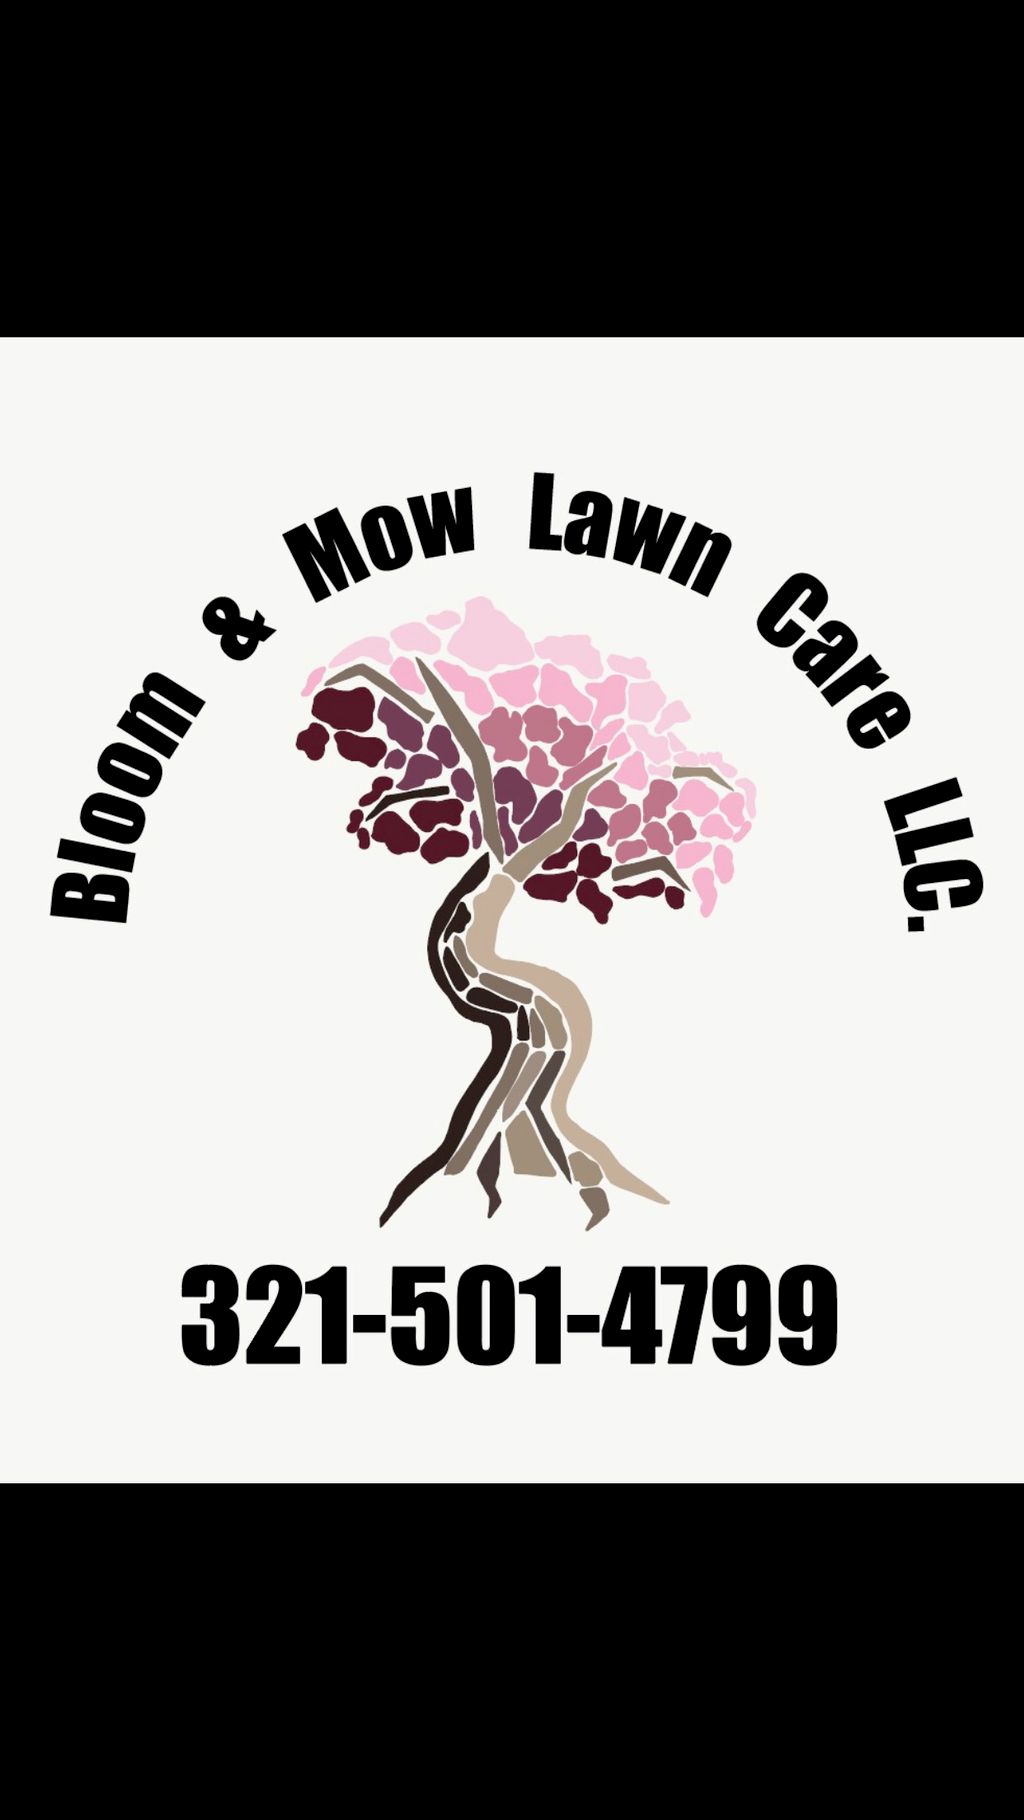 Bloom and Mow Lawn Care L.L.C